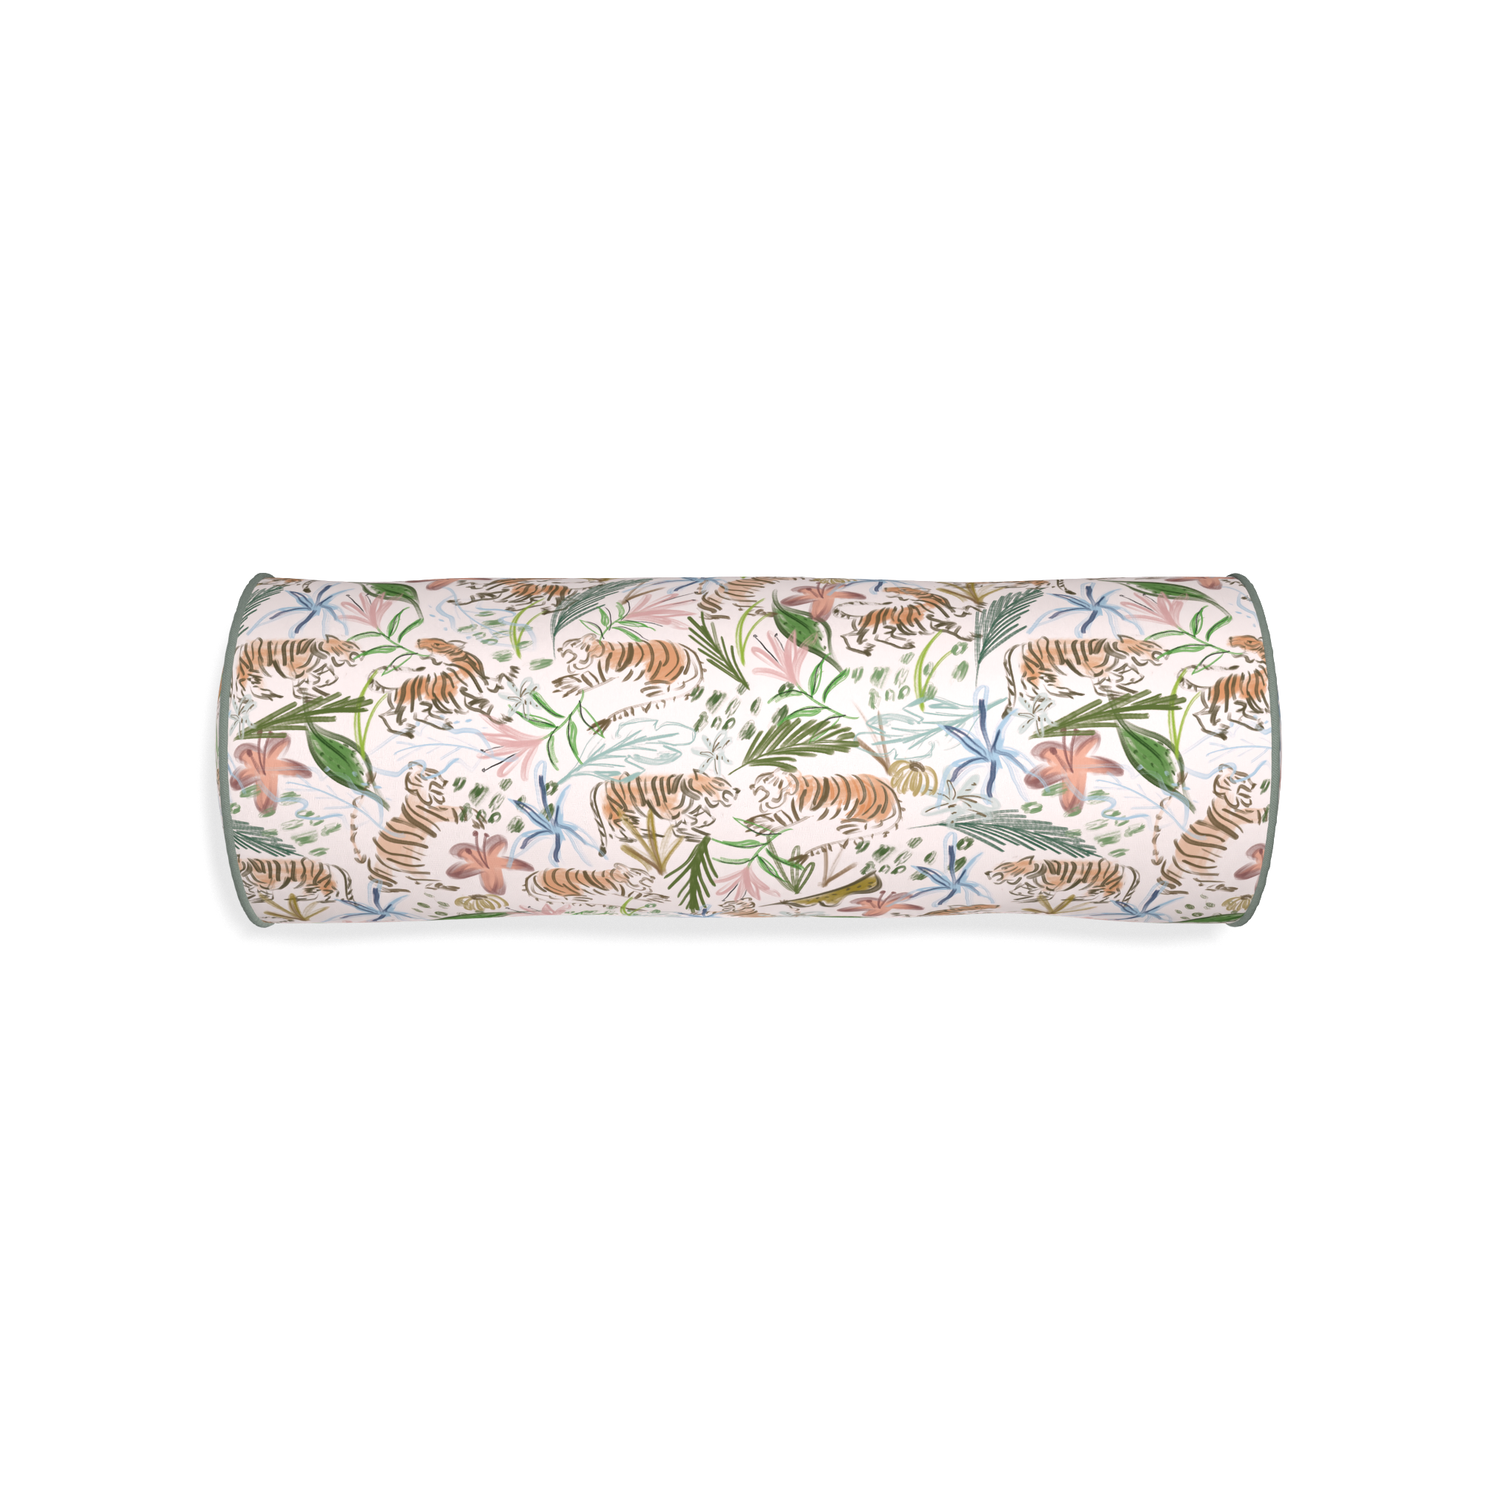 Bolster frida pink custom pink chinoiserie tigerpillow with sage piping on white background